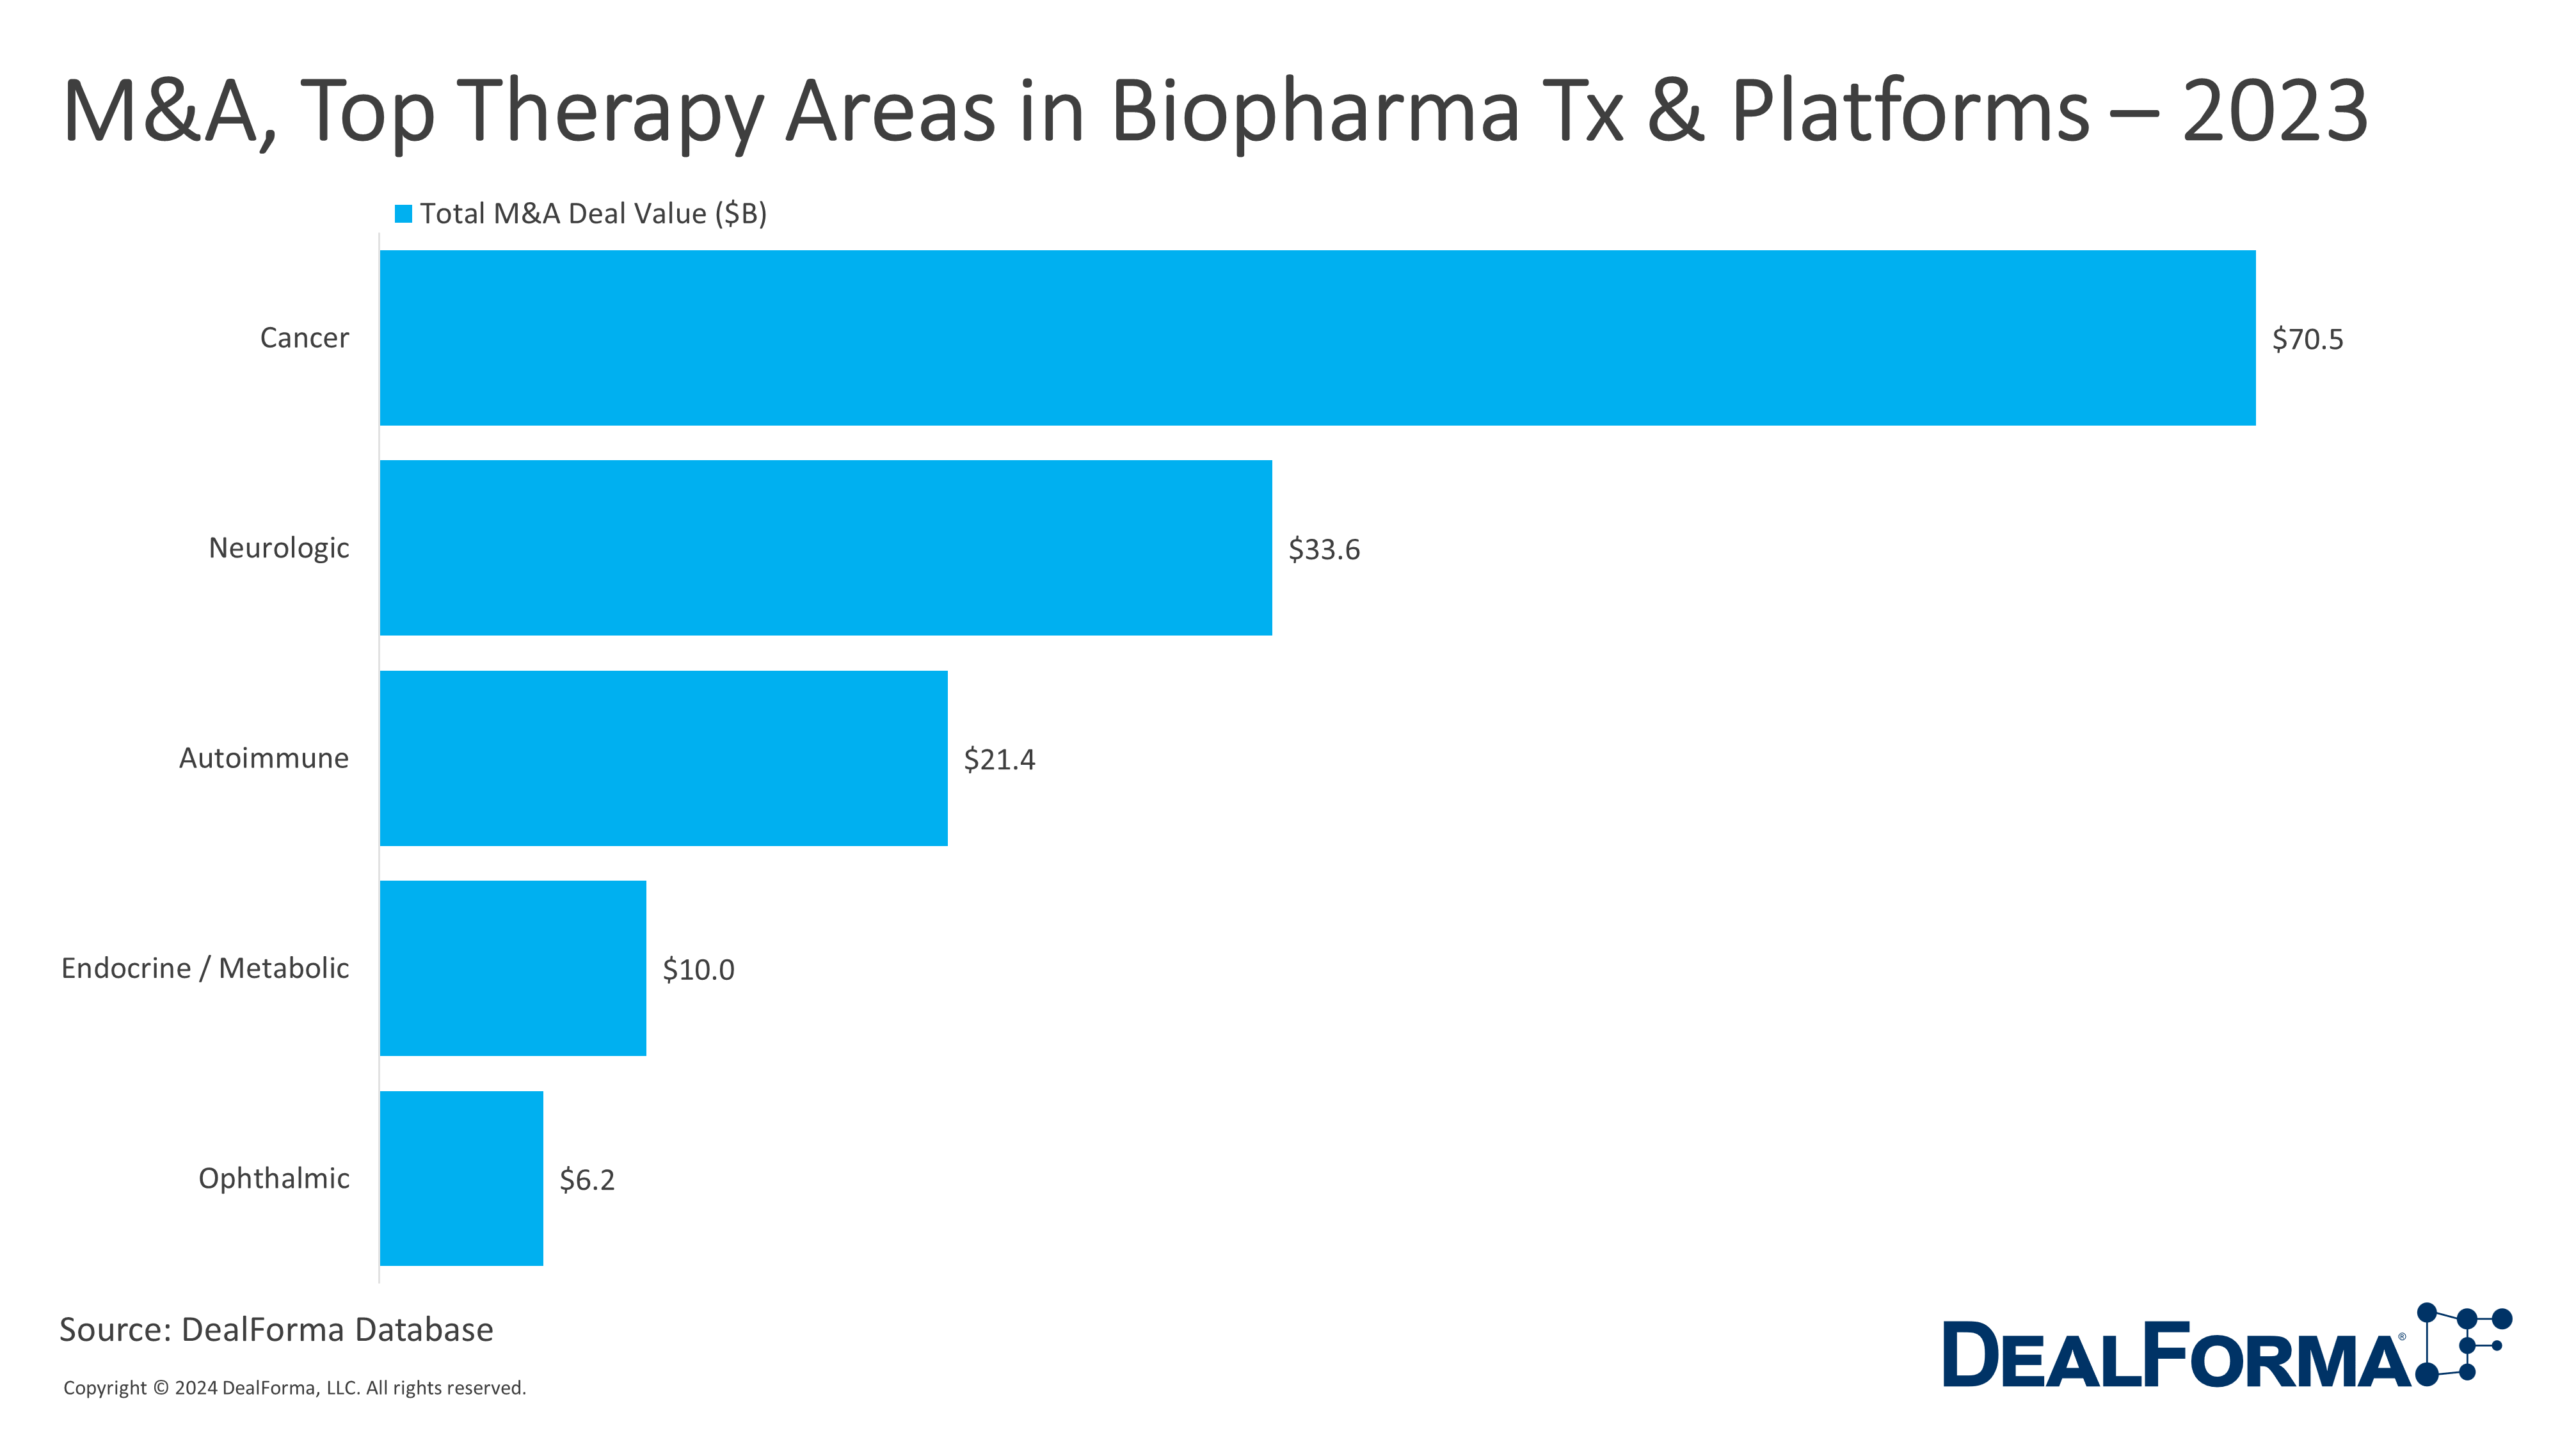 M&A, Top Therapy Areas in Biopharma Tx & Platforms – 2023